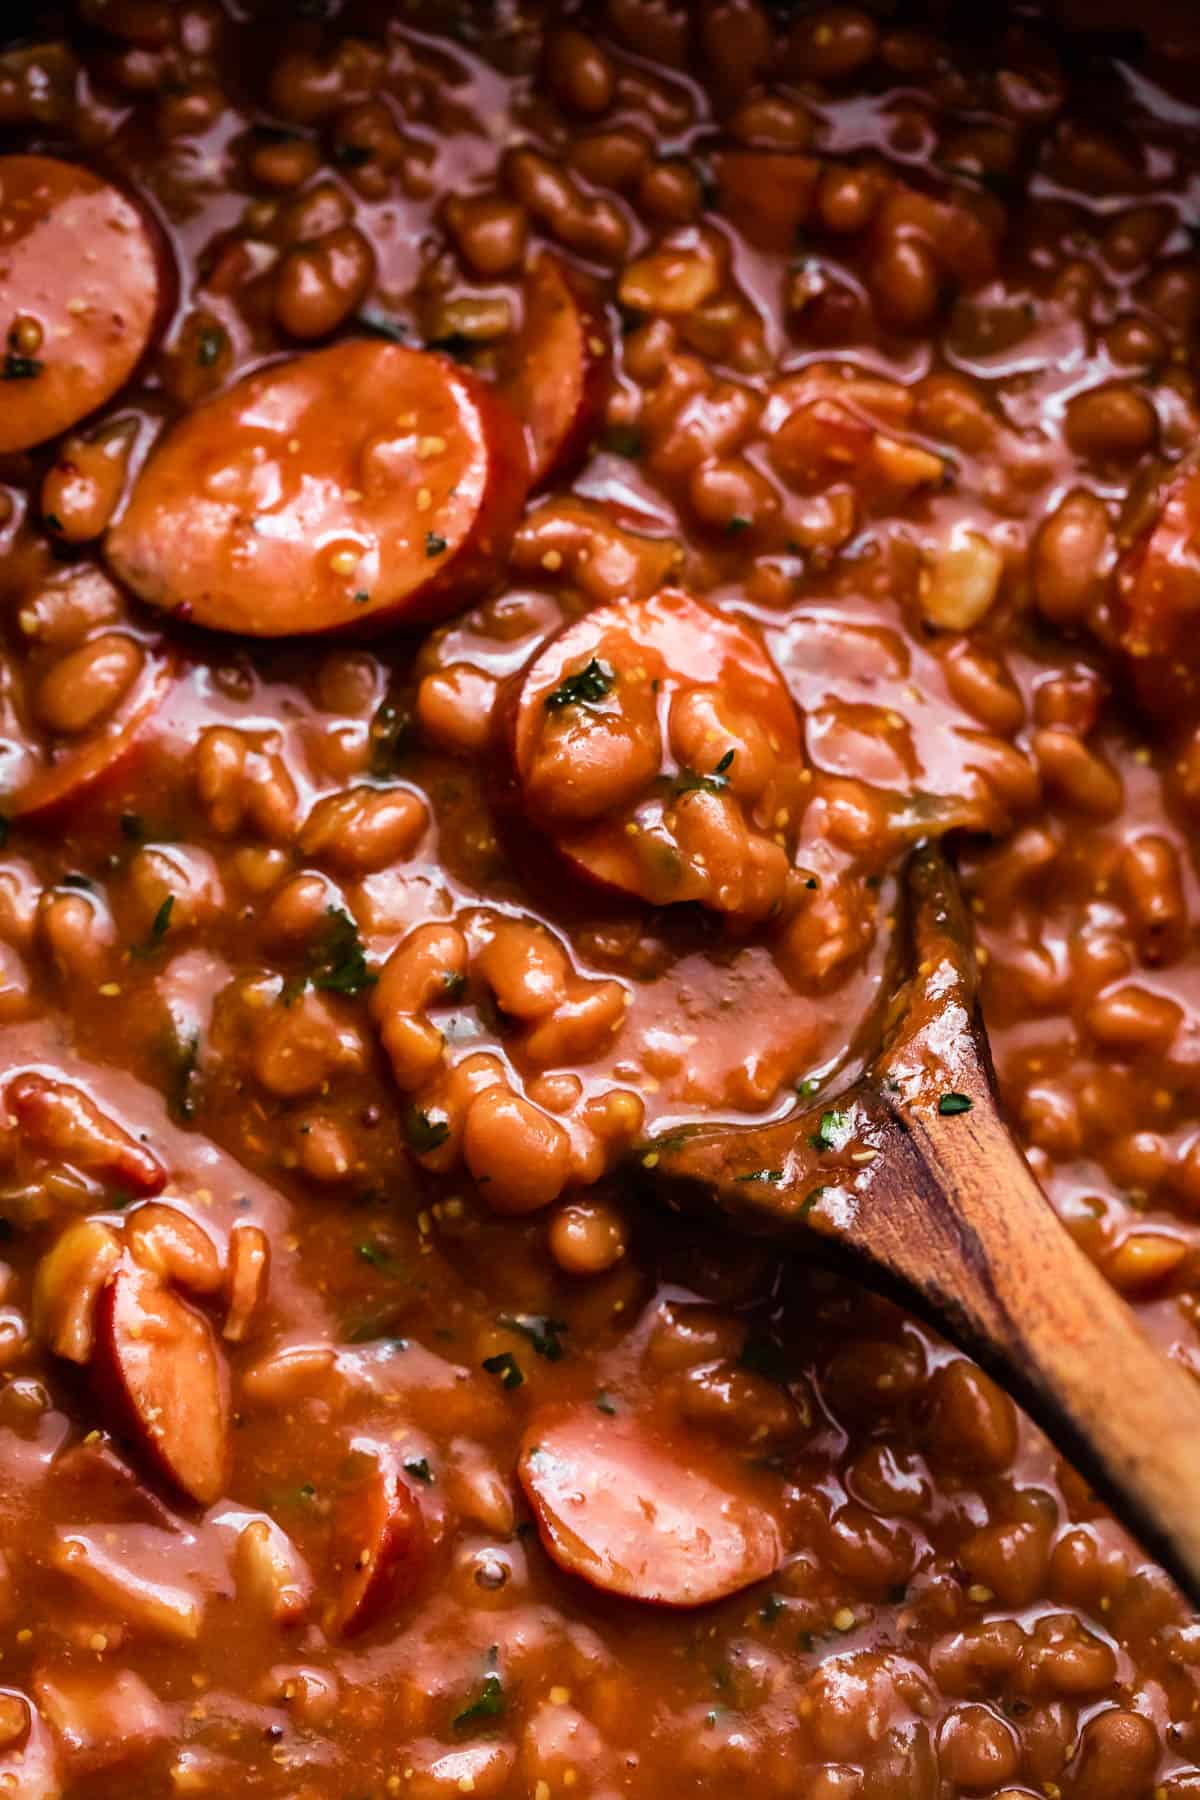 wooden spoon stirring through baked beans and sausage.